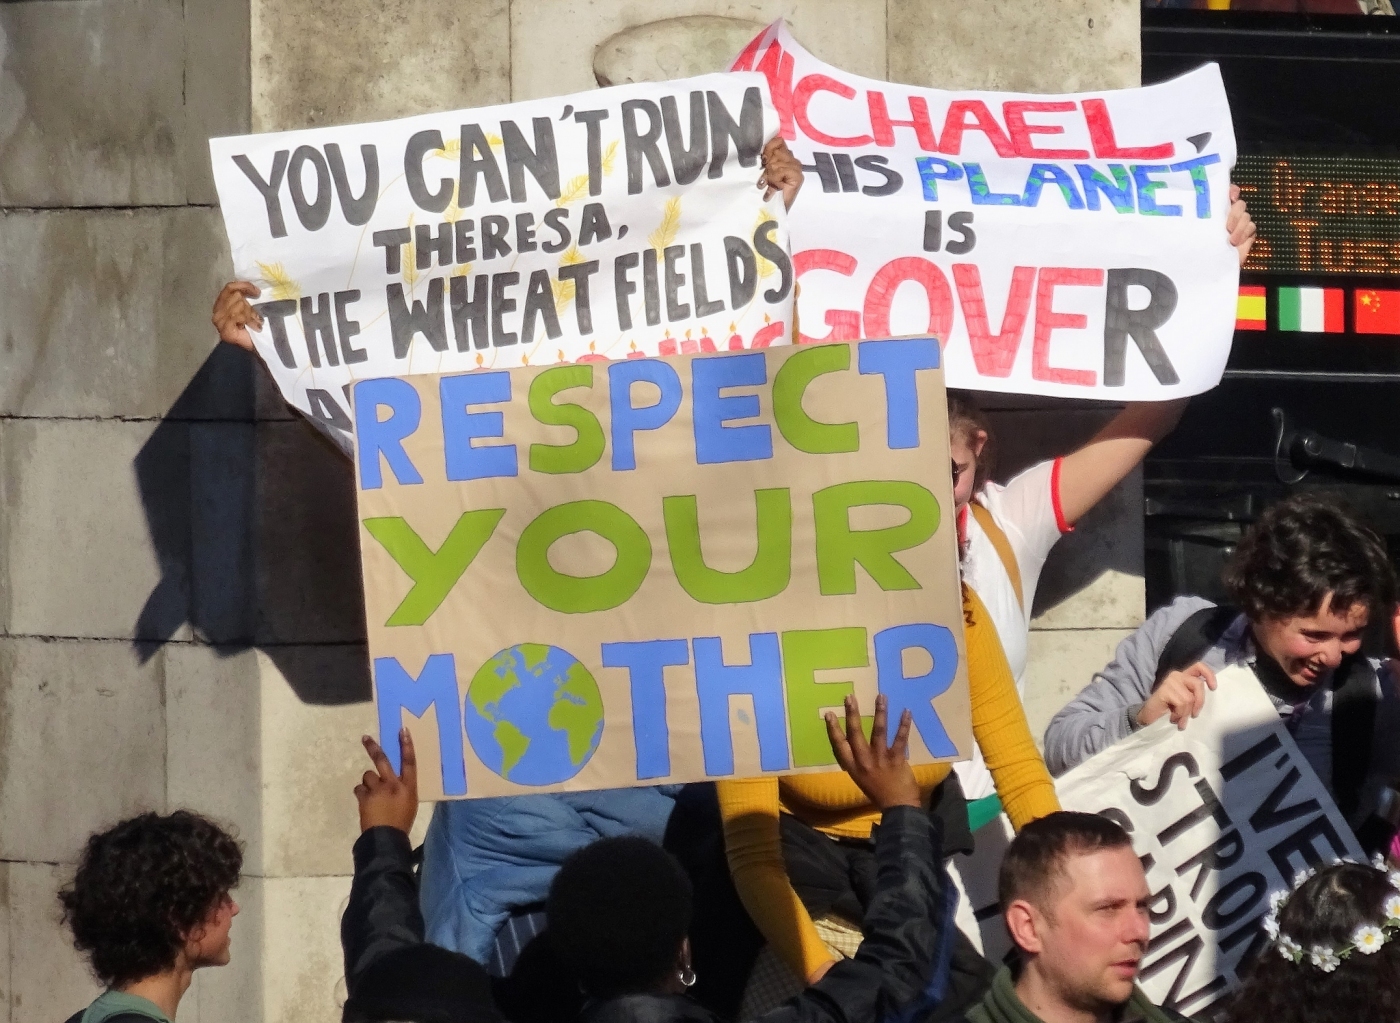 Placard from school strike for climate reads "Respect your mother"